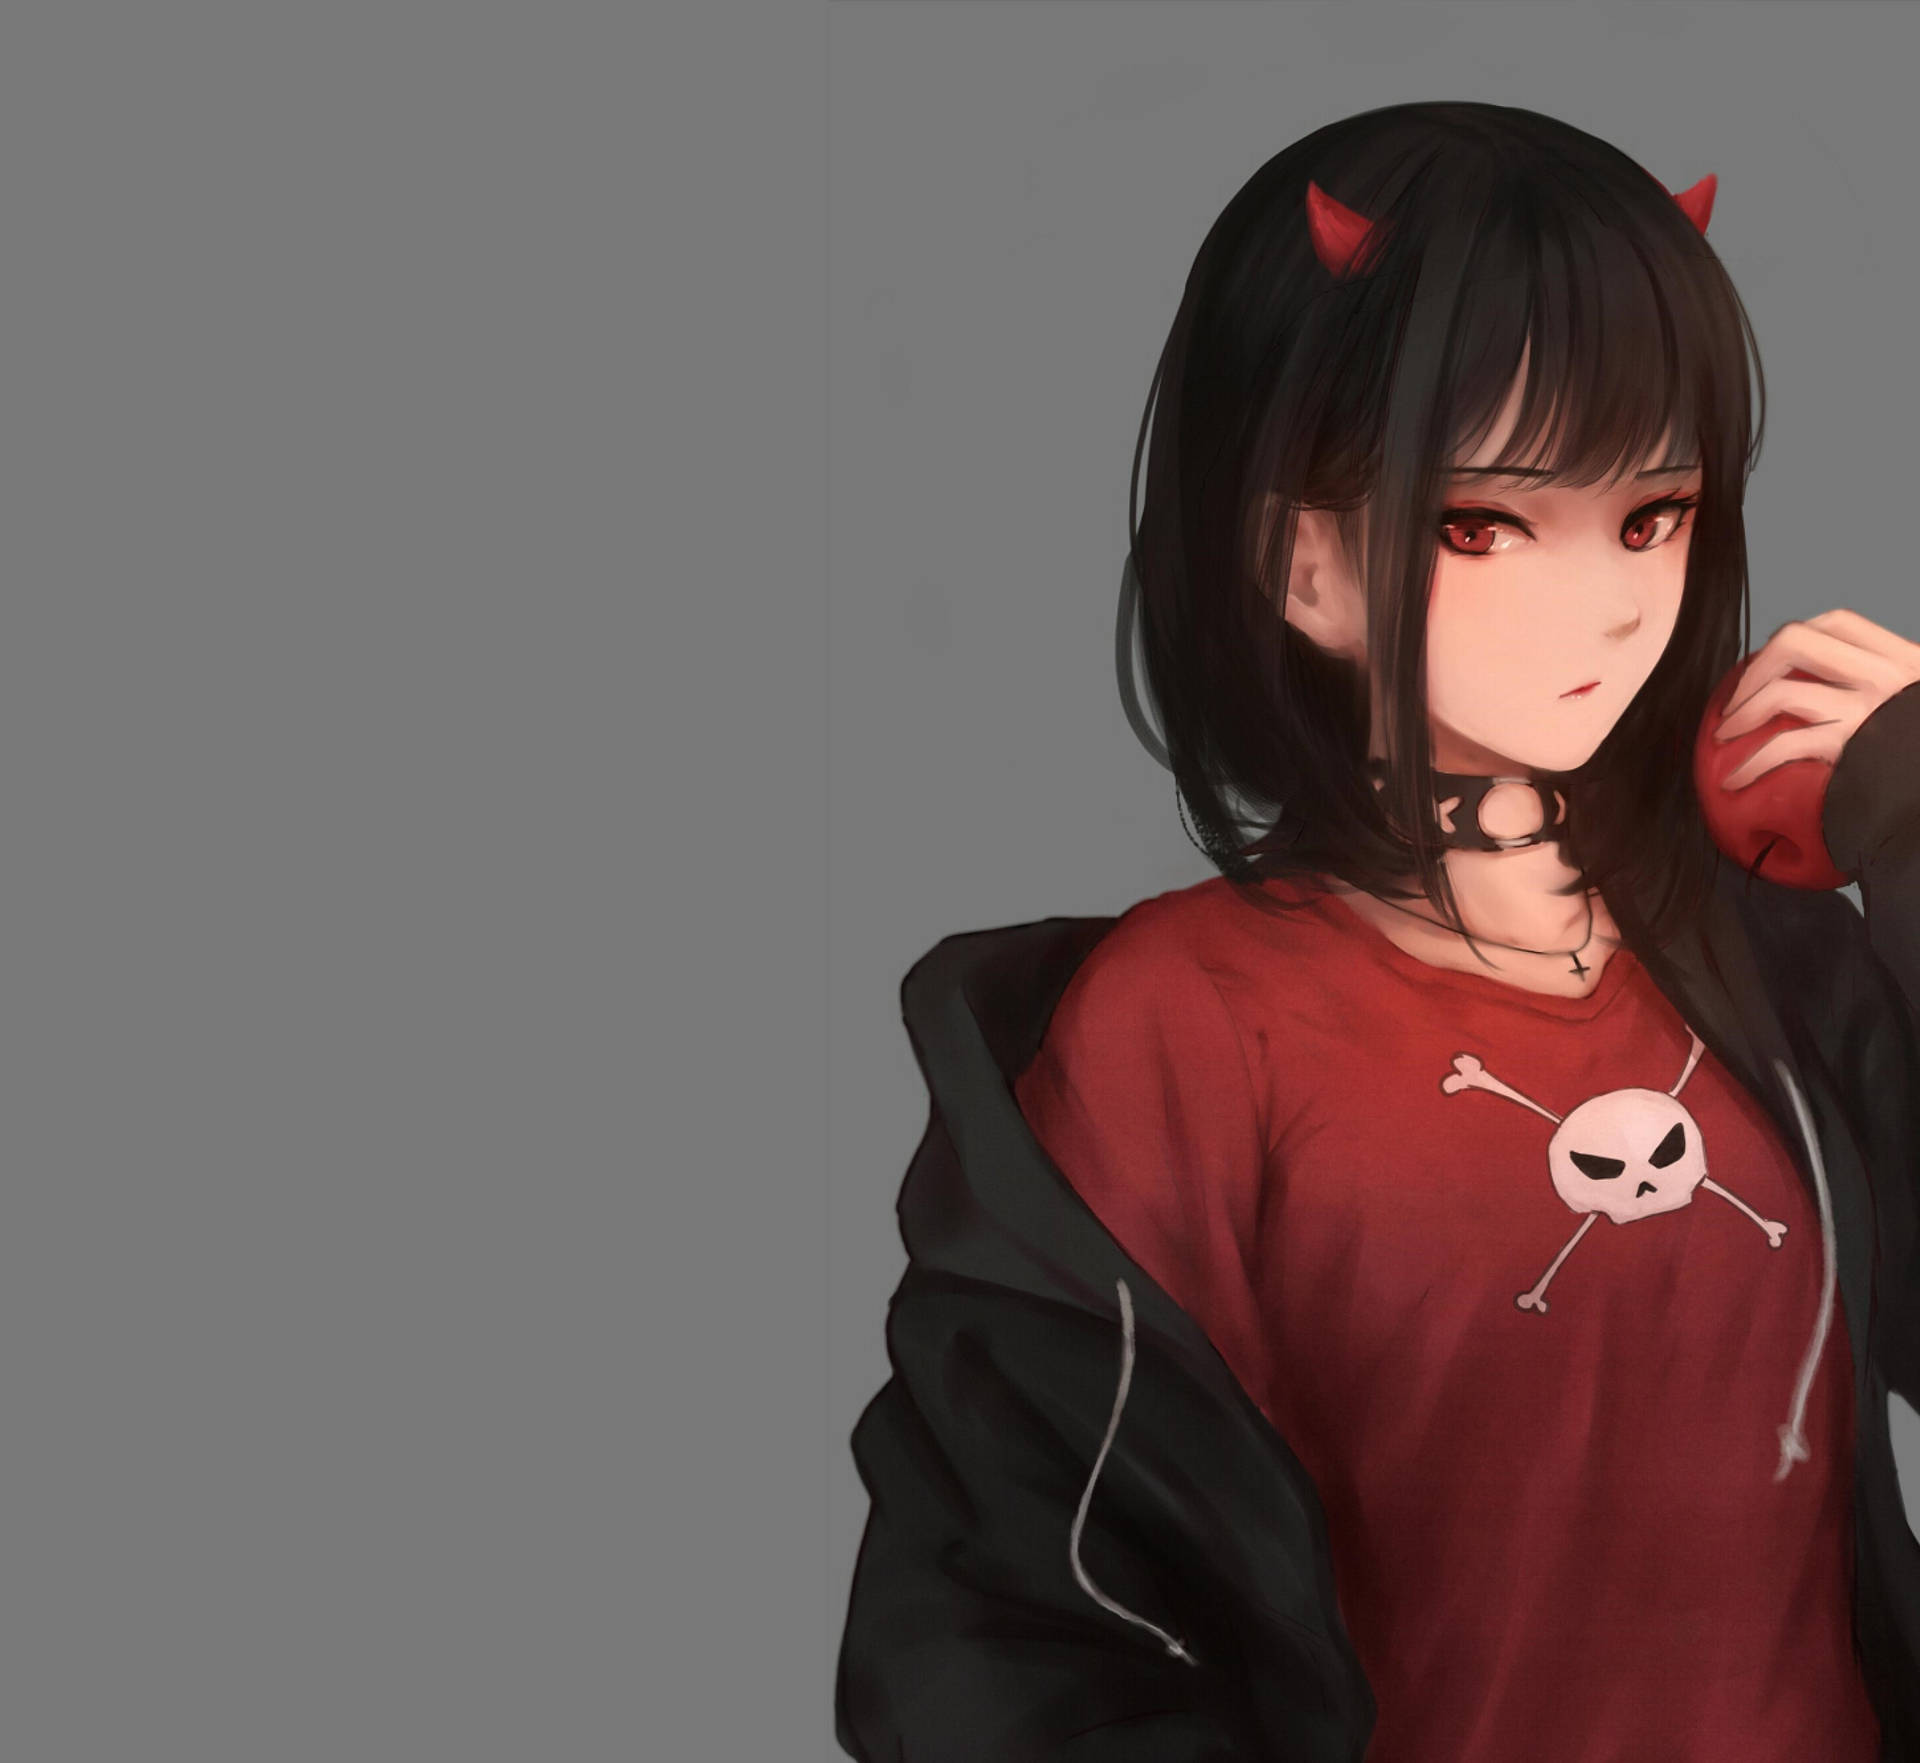 "Sad Demon Girl Struggling With Loneliness" Wallpaper